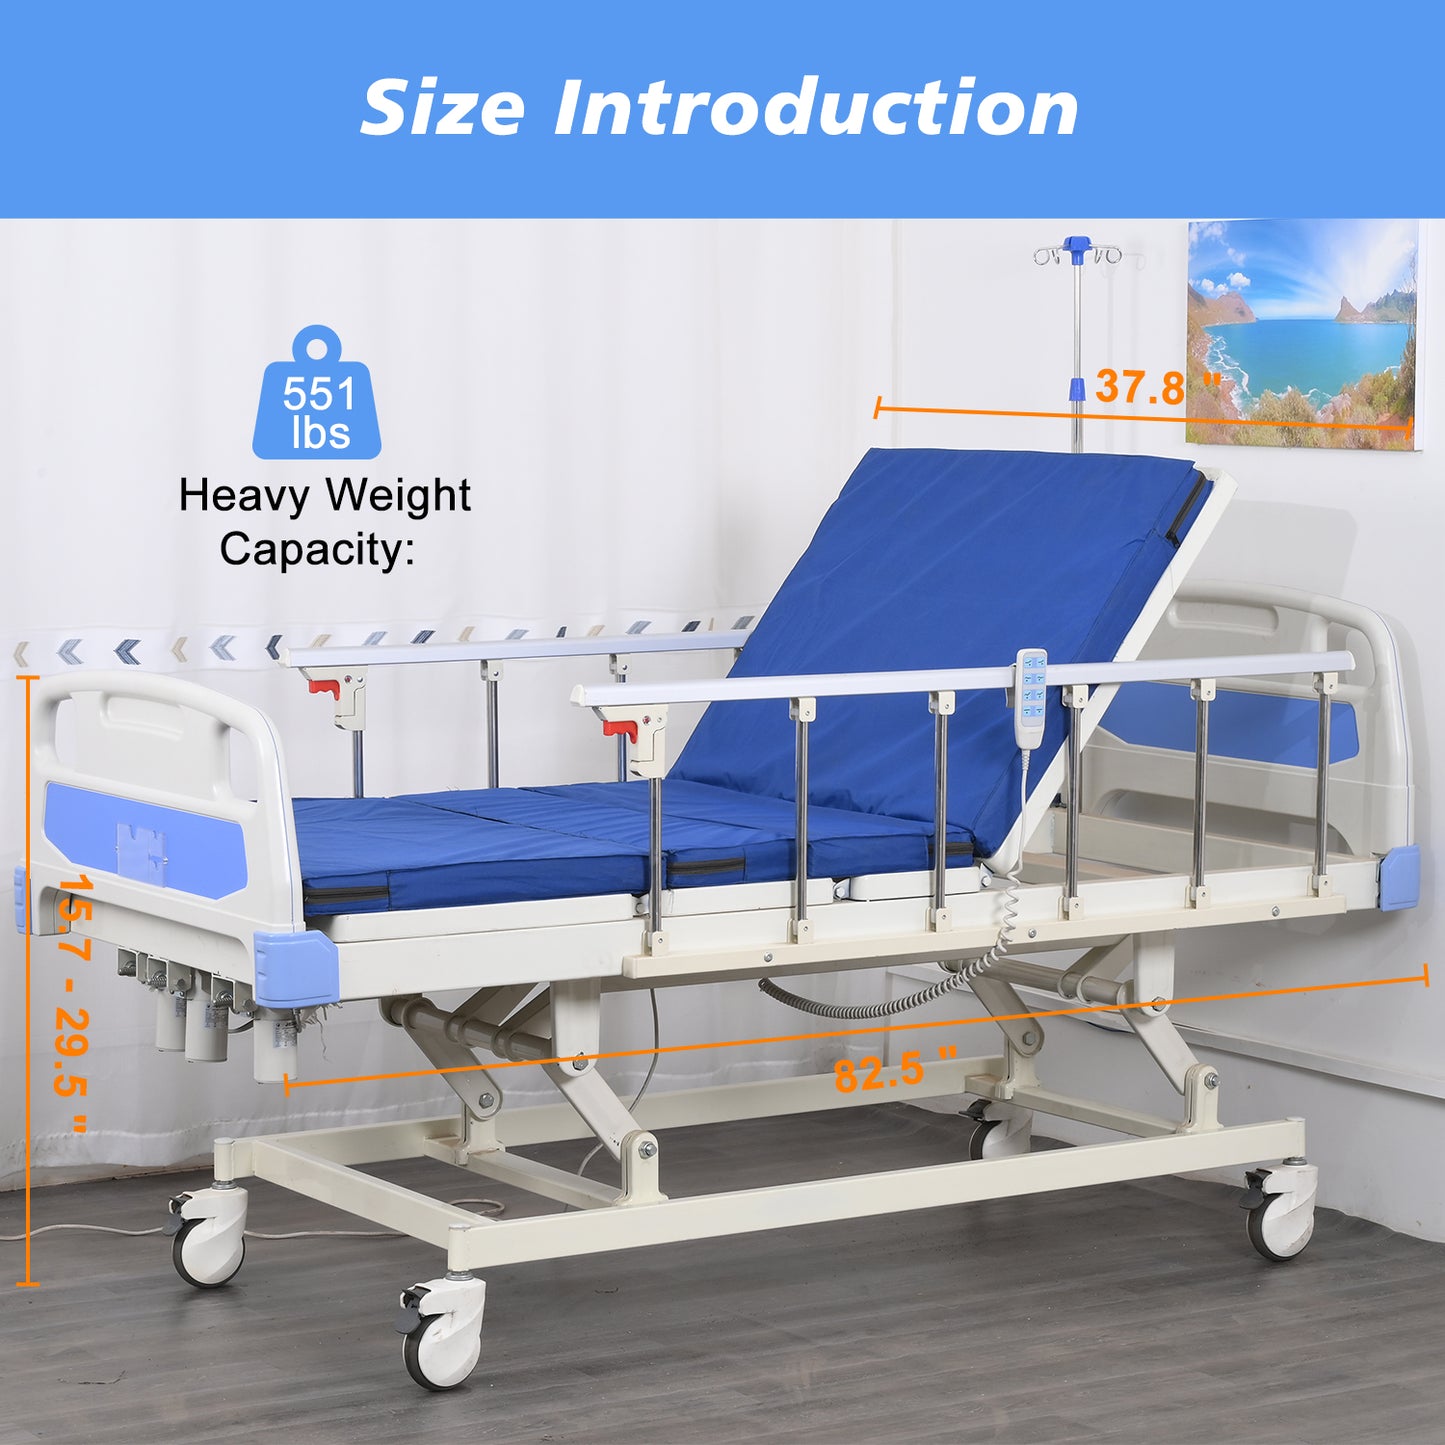 3-Function Remote Control Electric Hospital Bed w/ Full-Length Adjustable Guardrails, S/S IV Pole, Wash Basin, Bedpan, and Removable Table